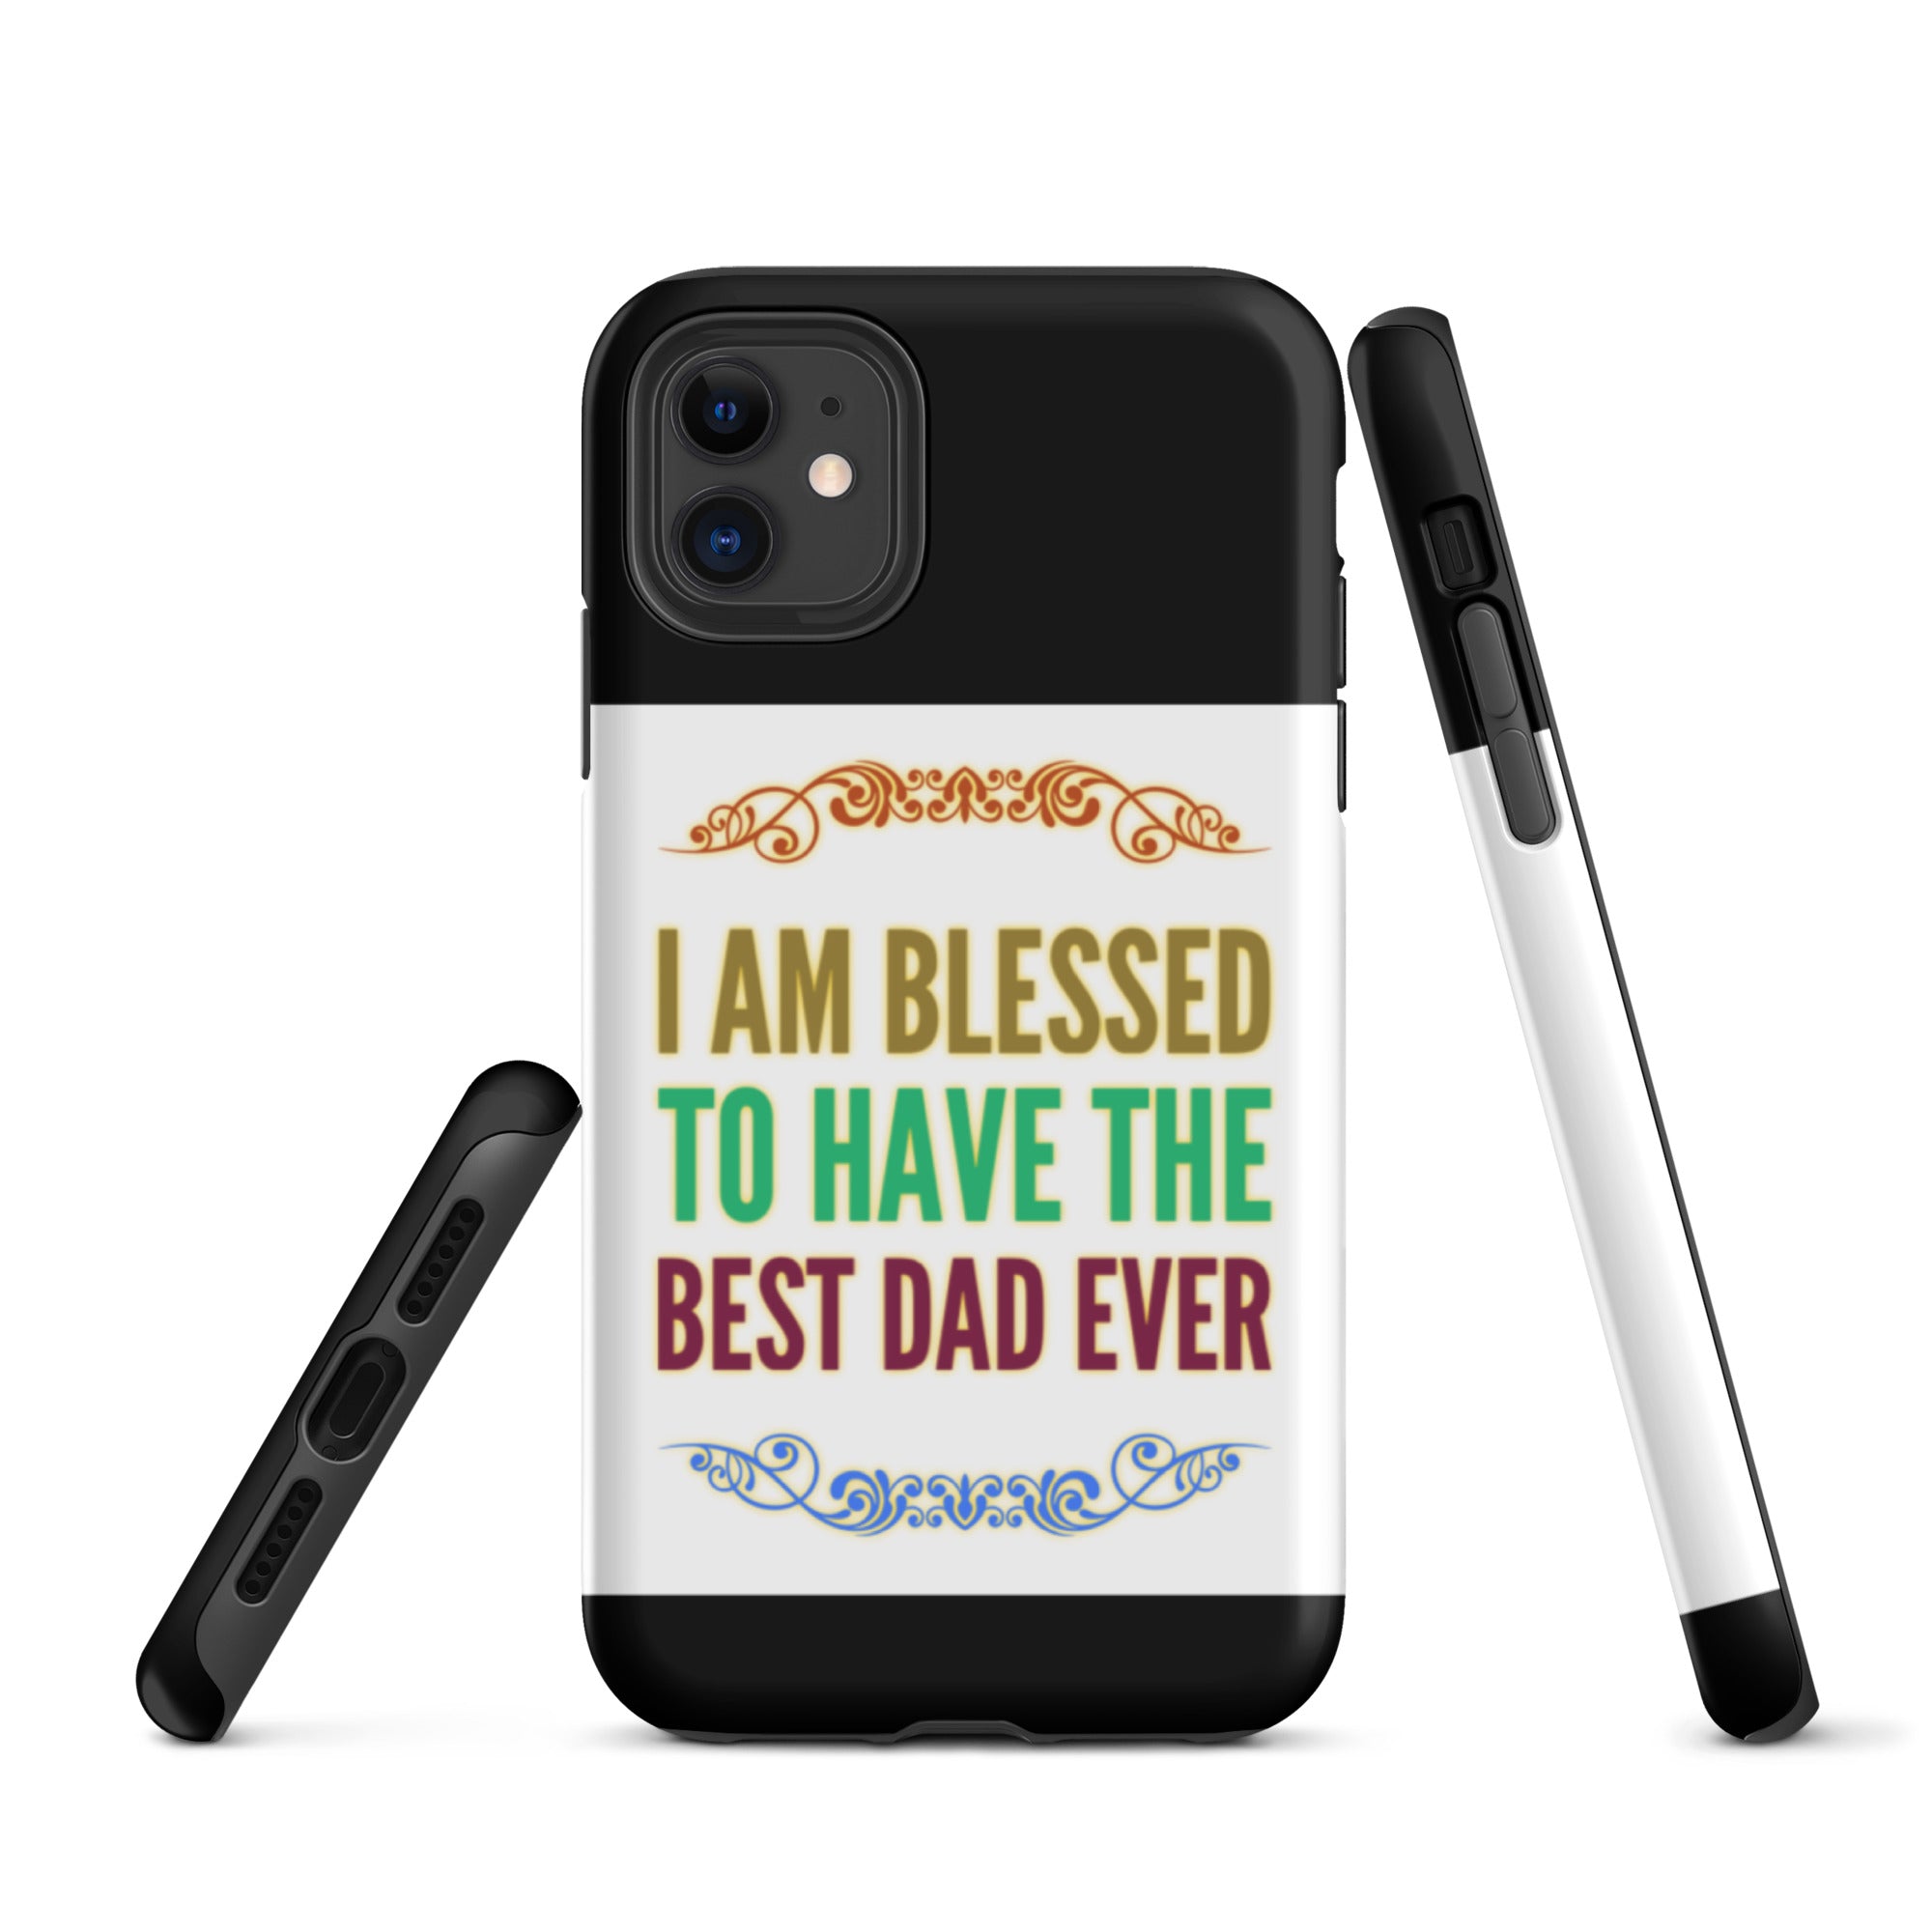 GloWell Designs - Tough iPhone Case - Affirmation Quote - Gift - Best Dad Ever - GloWell Designs